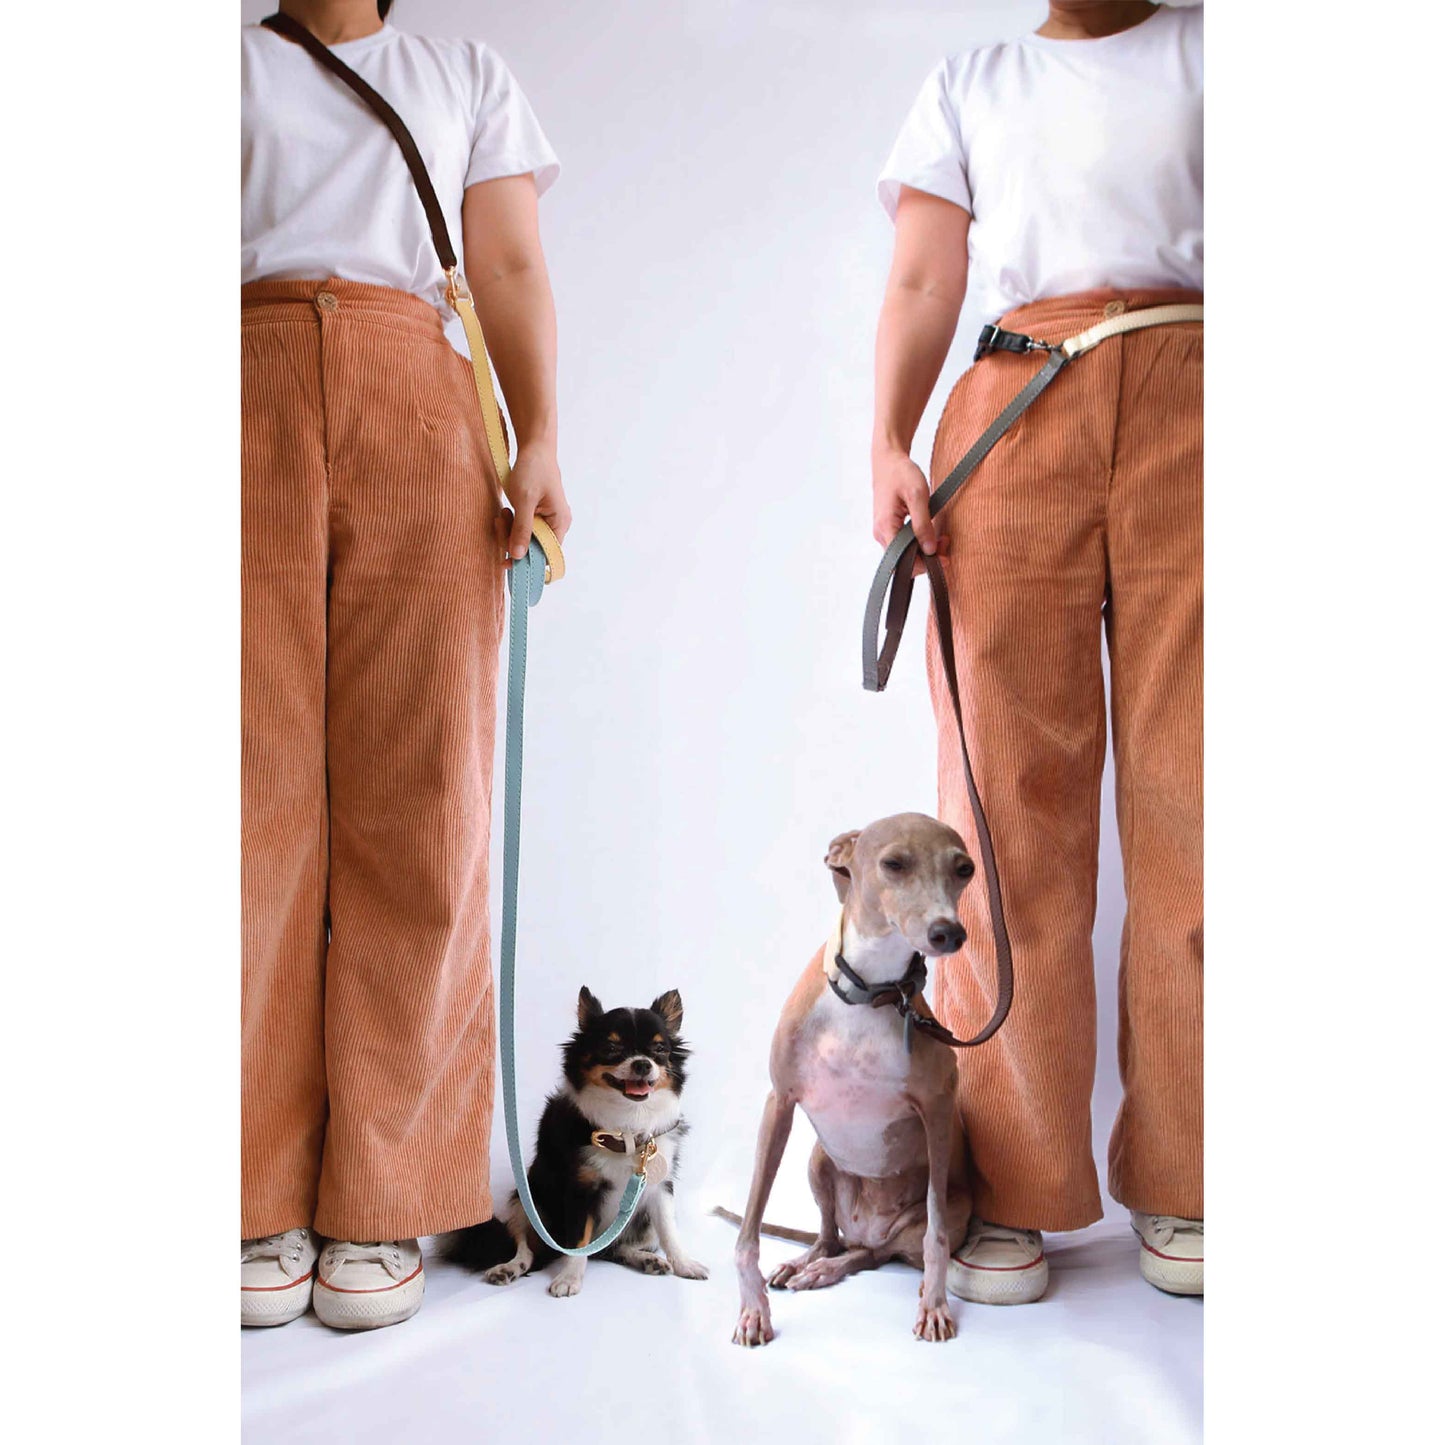 Musée Simply Multifunction Soft Leather Pet Leash - Adjustable Length Hands-free Crossbody Dog Leash